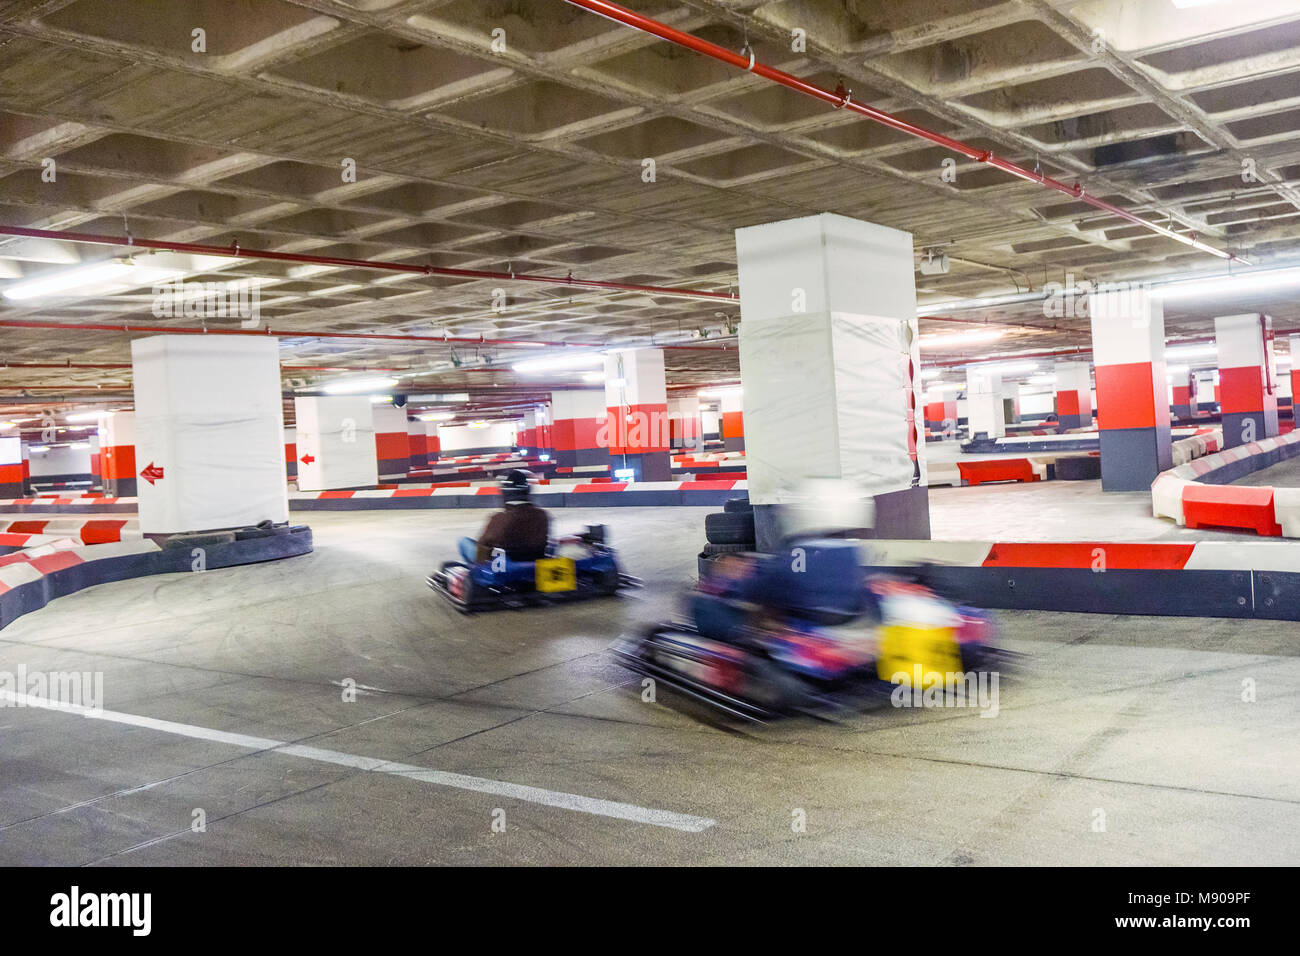 Two people racing on indoor karting track located in underground parking lot Stock Photo